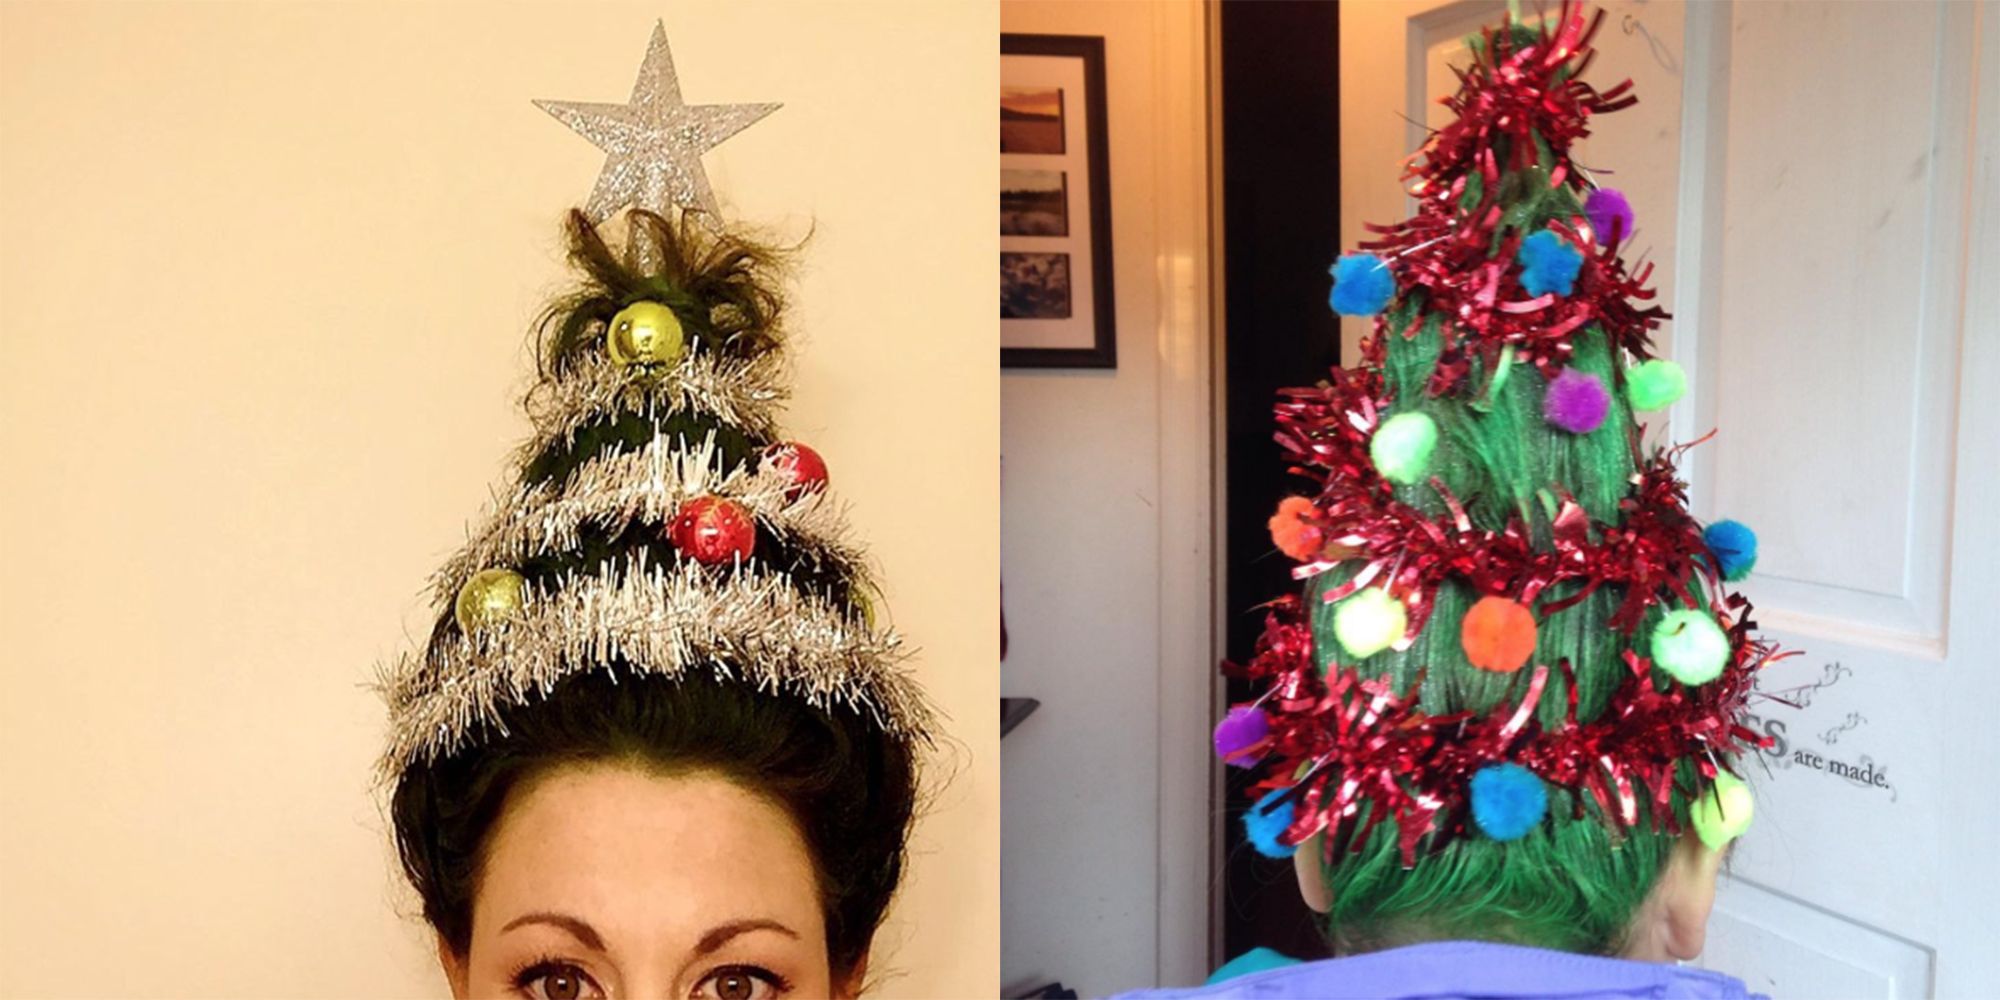 3 Christmas Tree Hairstyles In 3 Minutes  Hairstyles For Girls  Princess  Hairstyles